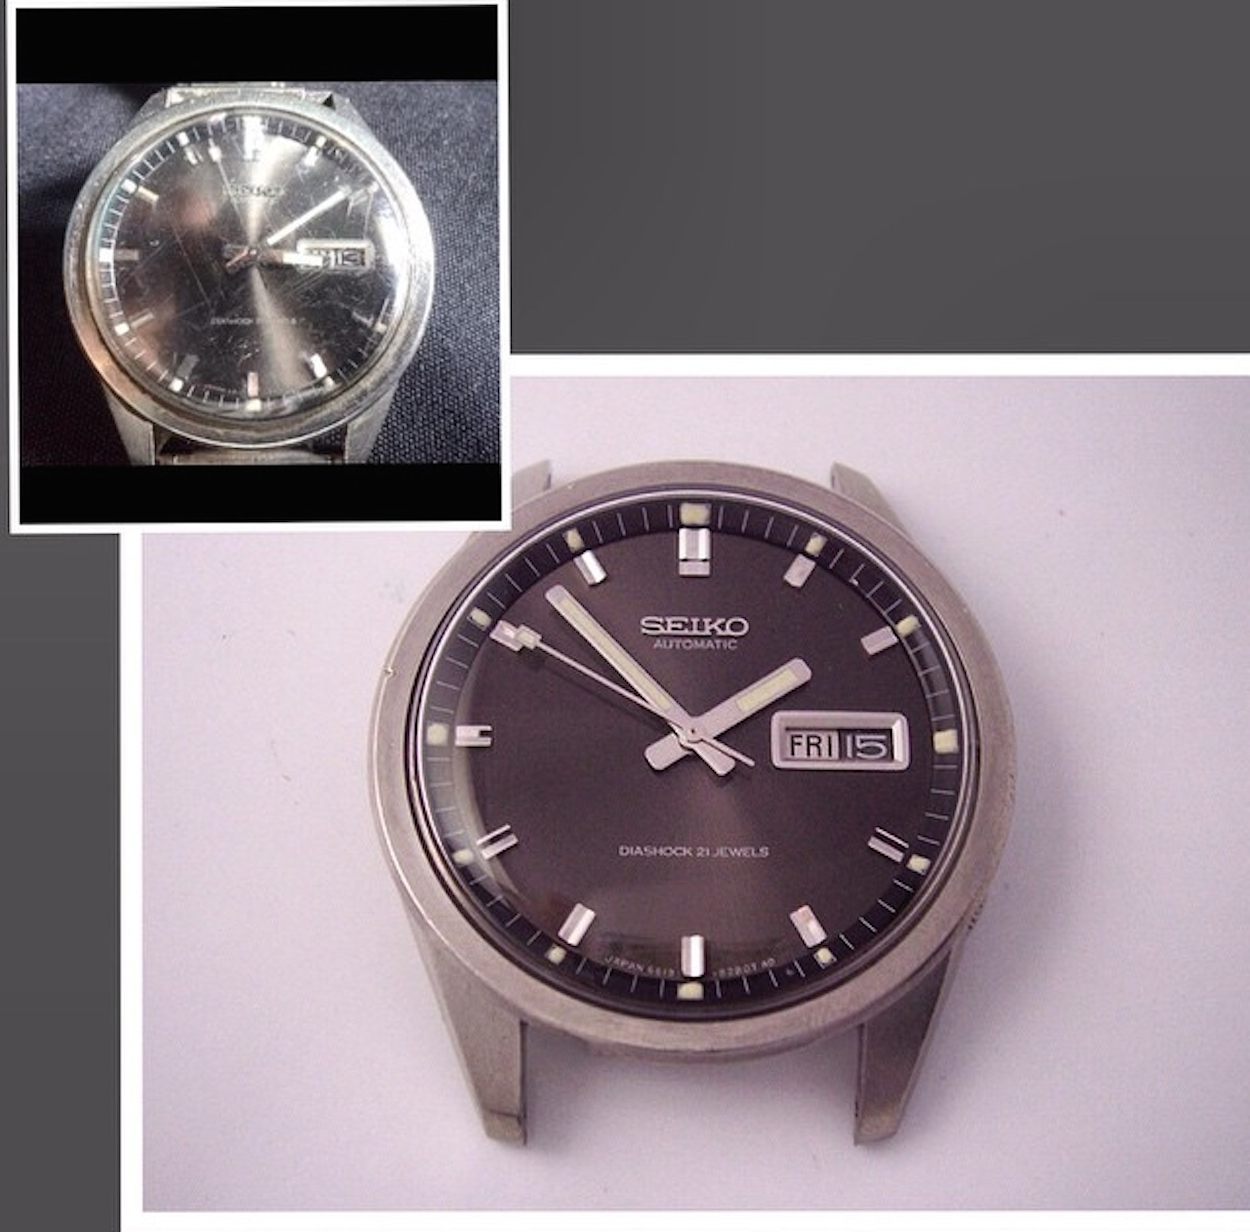 Seiko Sportsmatic before and after